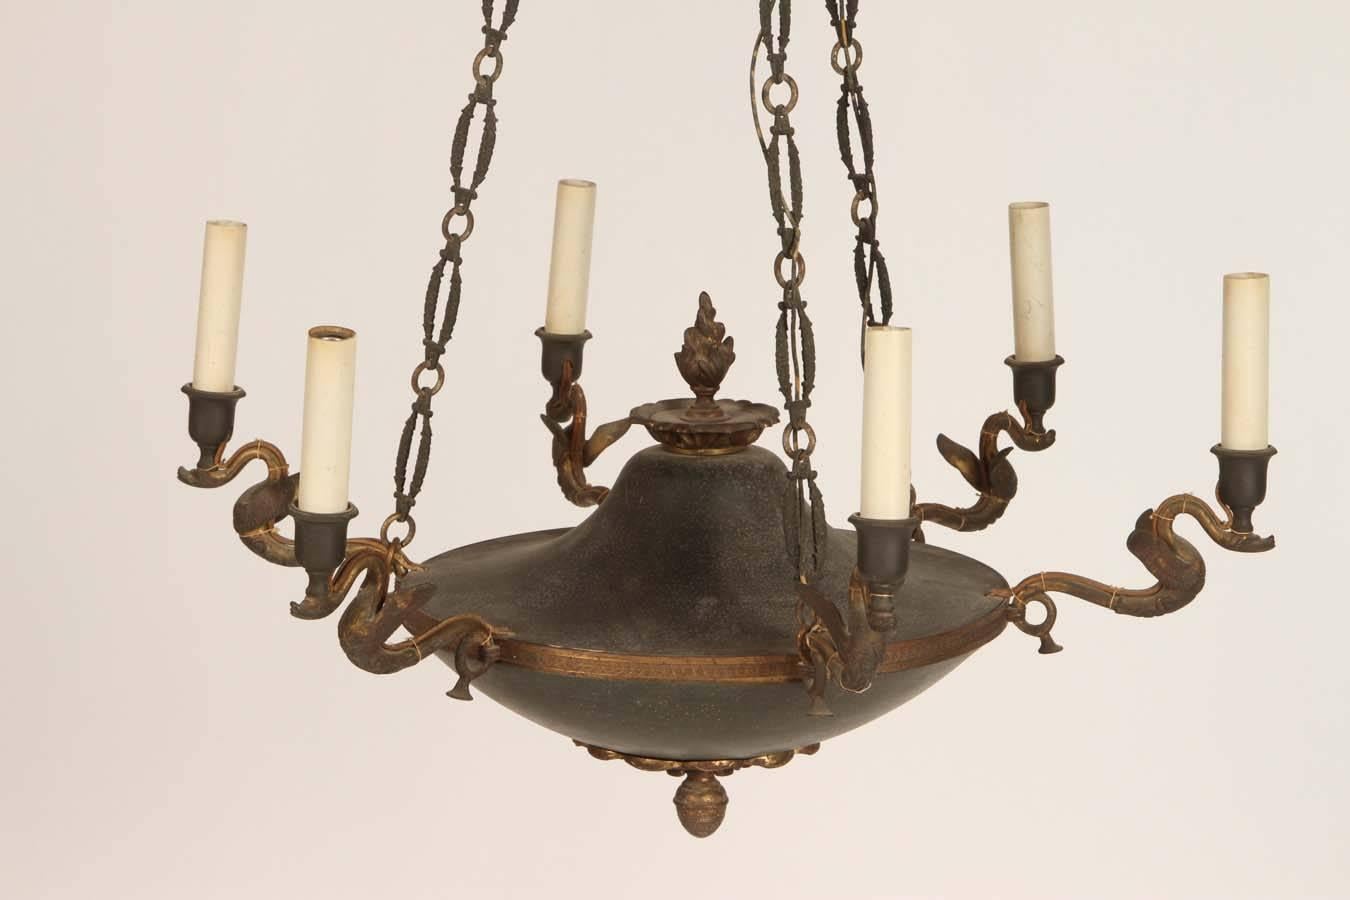 This lovely French Empire style chandelier has six swan arms and a flame finial. Dark green tole painted body. Wonderful original chain and ceiling cap.